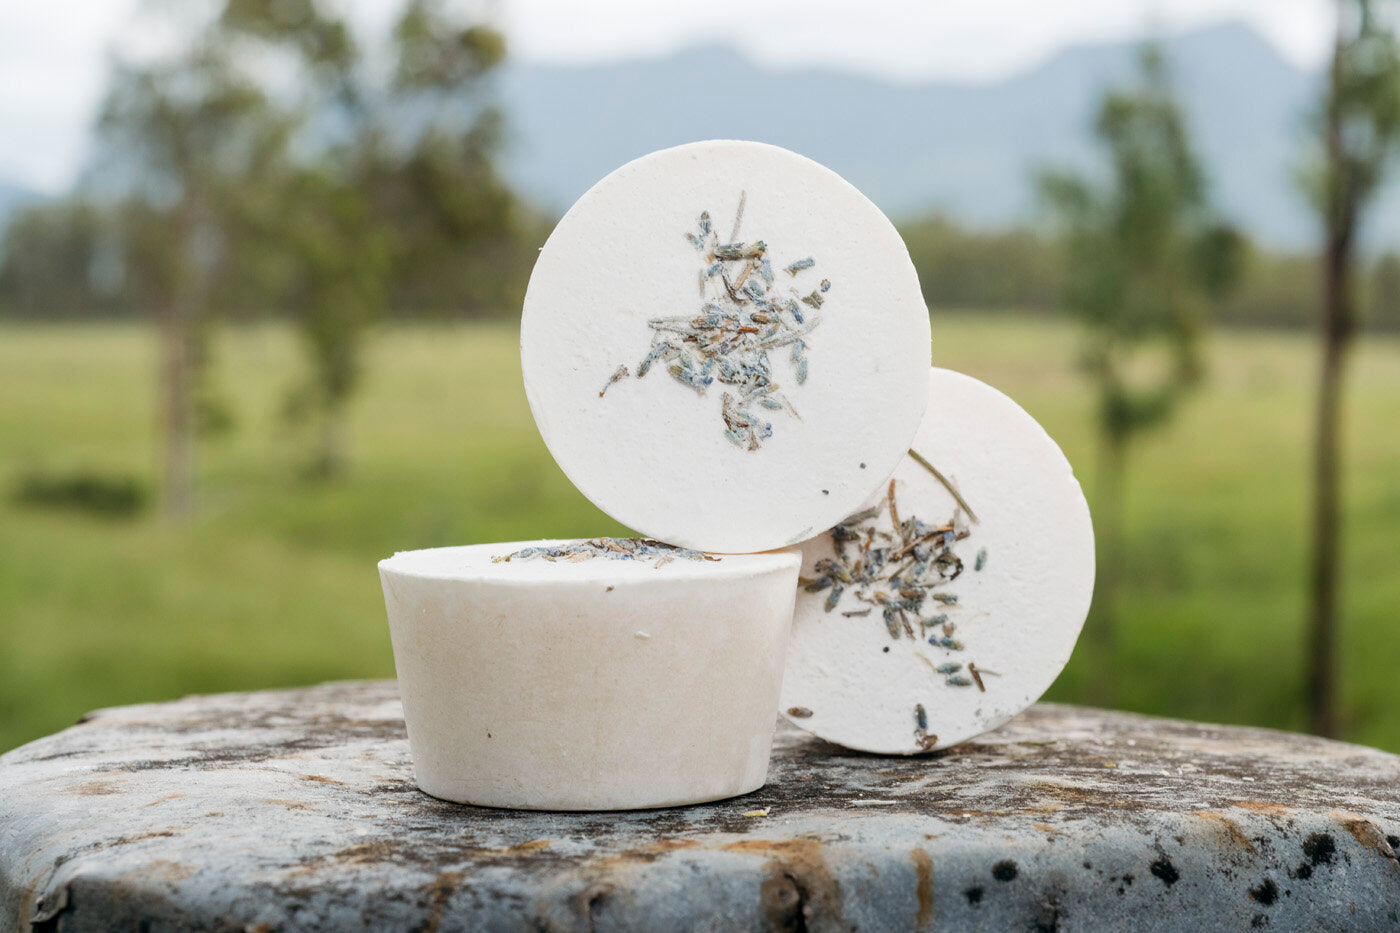 Coco & Myrtle Handmade Bath Products ( Support Rural Produce)